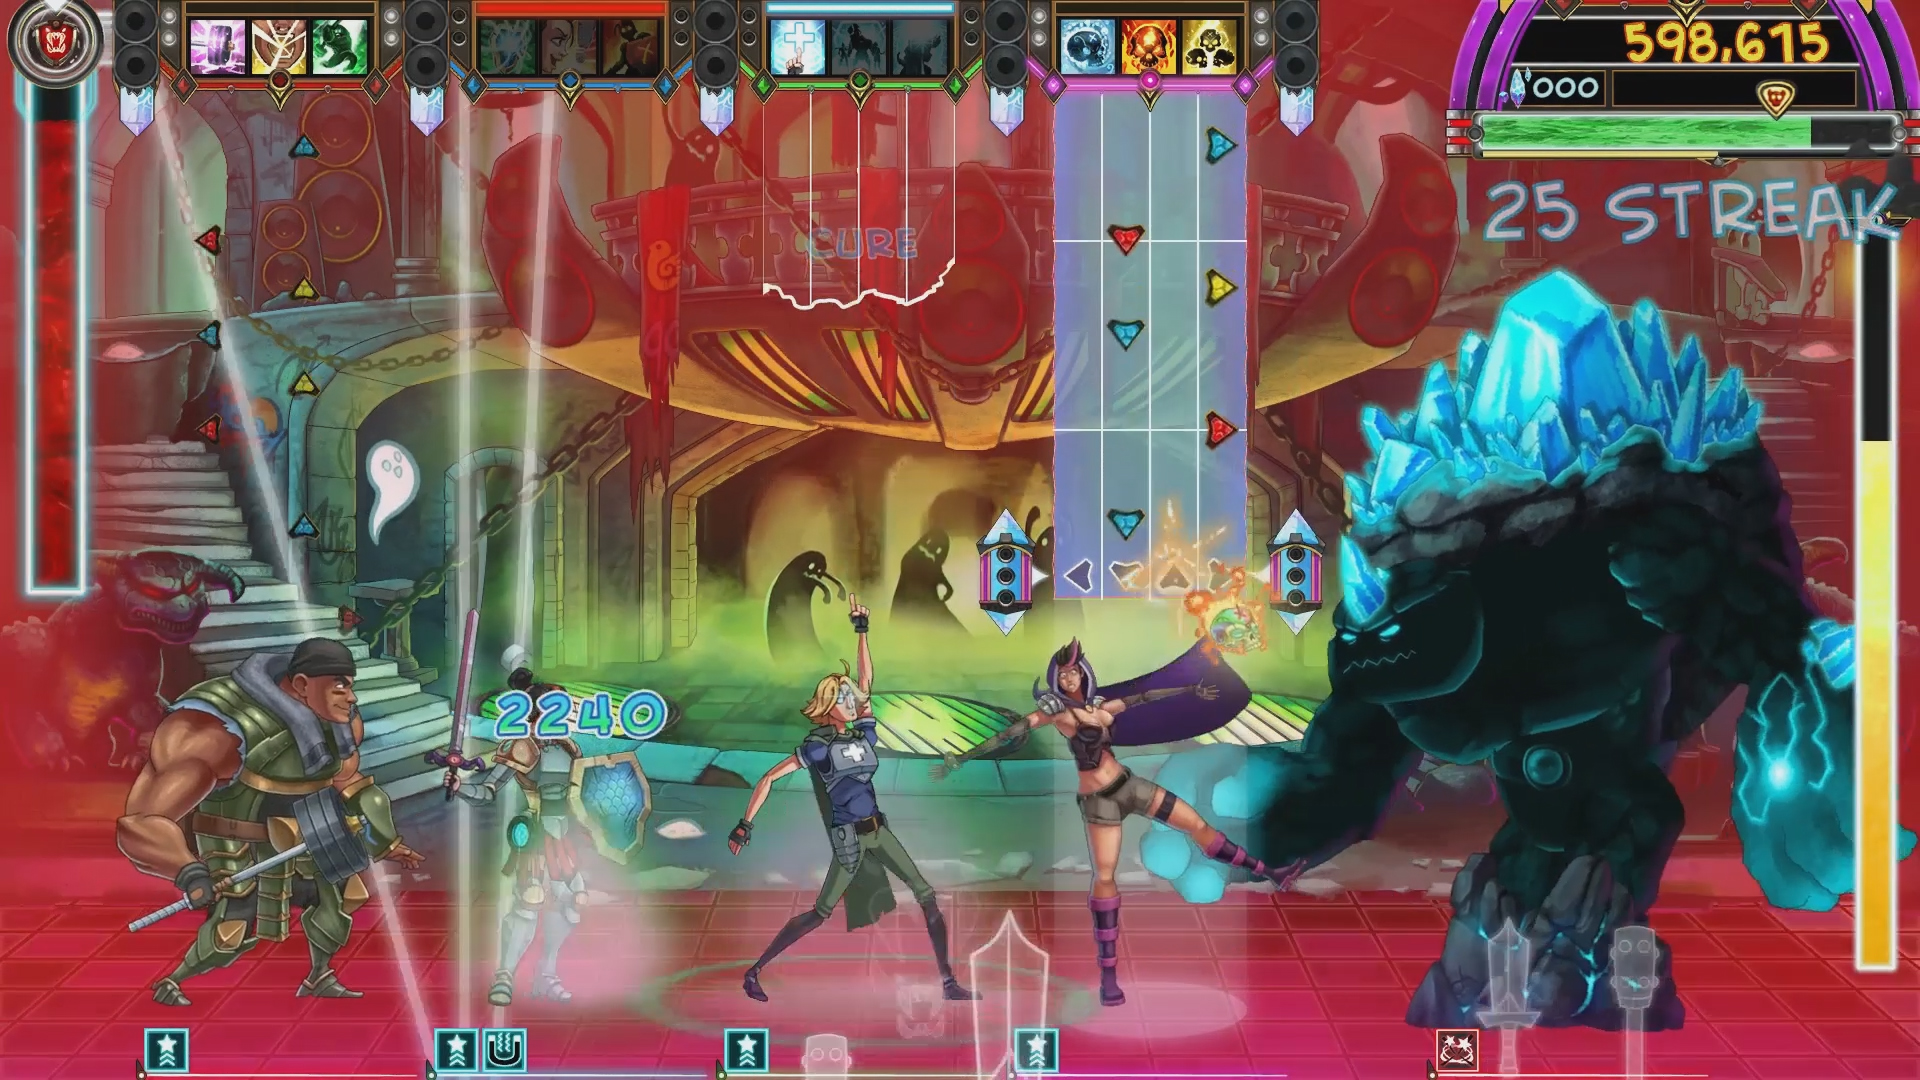 The Metronomicon - J-Punch Challenge Pack DLC Steam CD Key